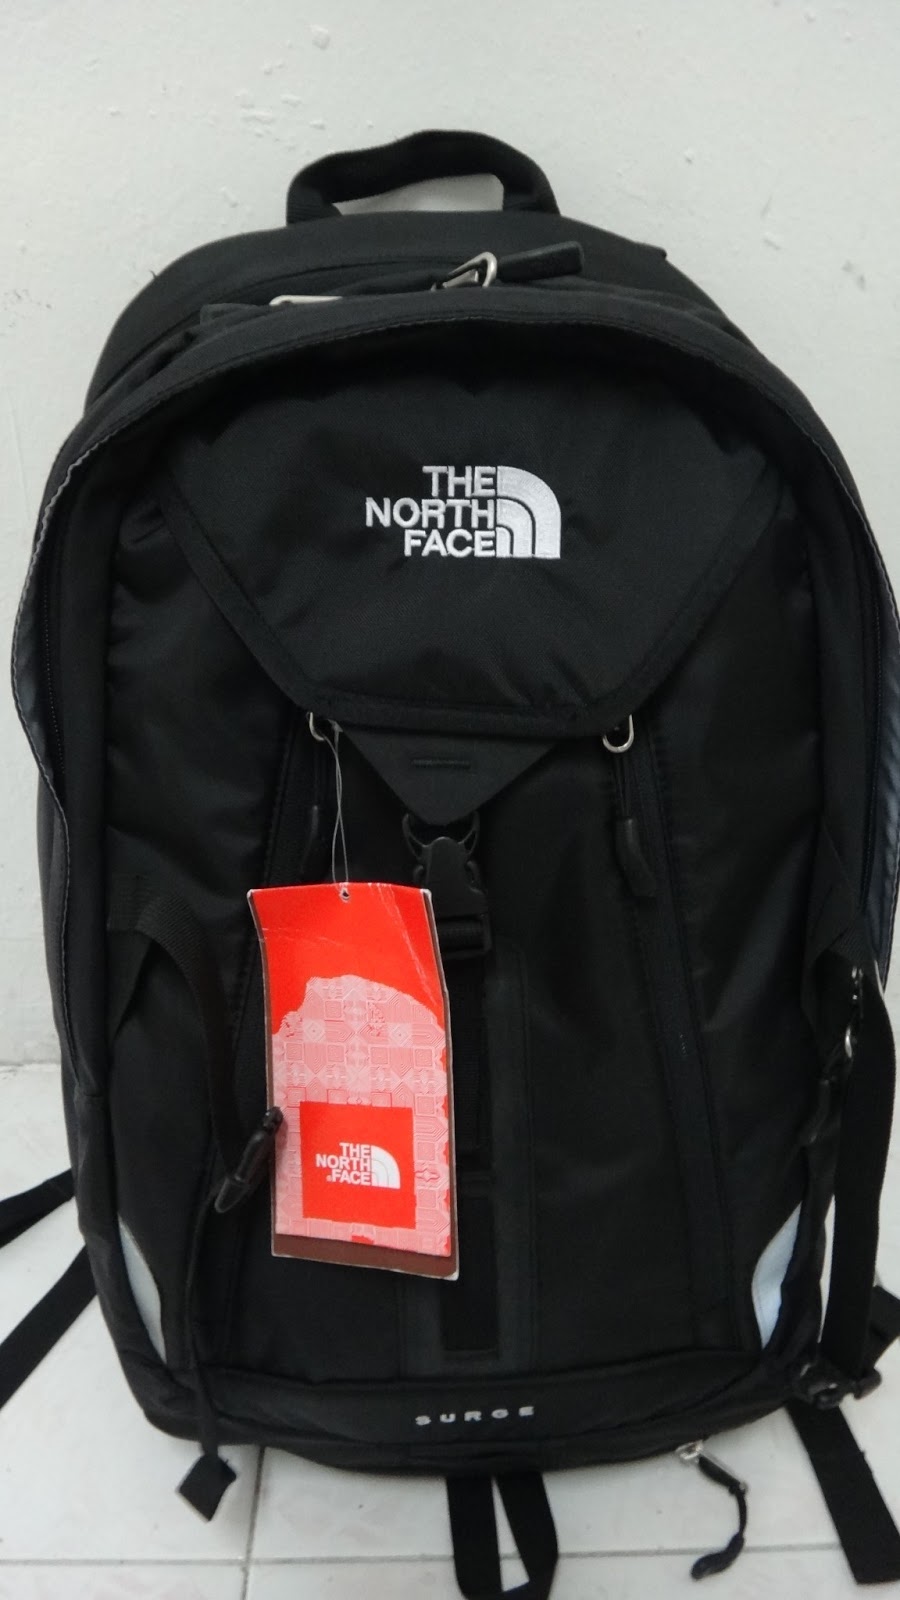 The North Face Backpack Comparison